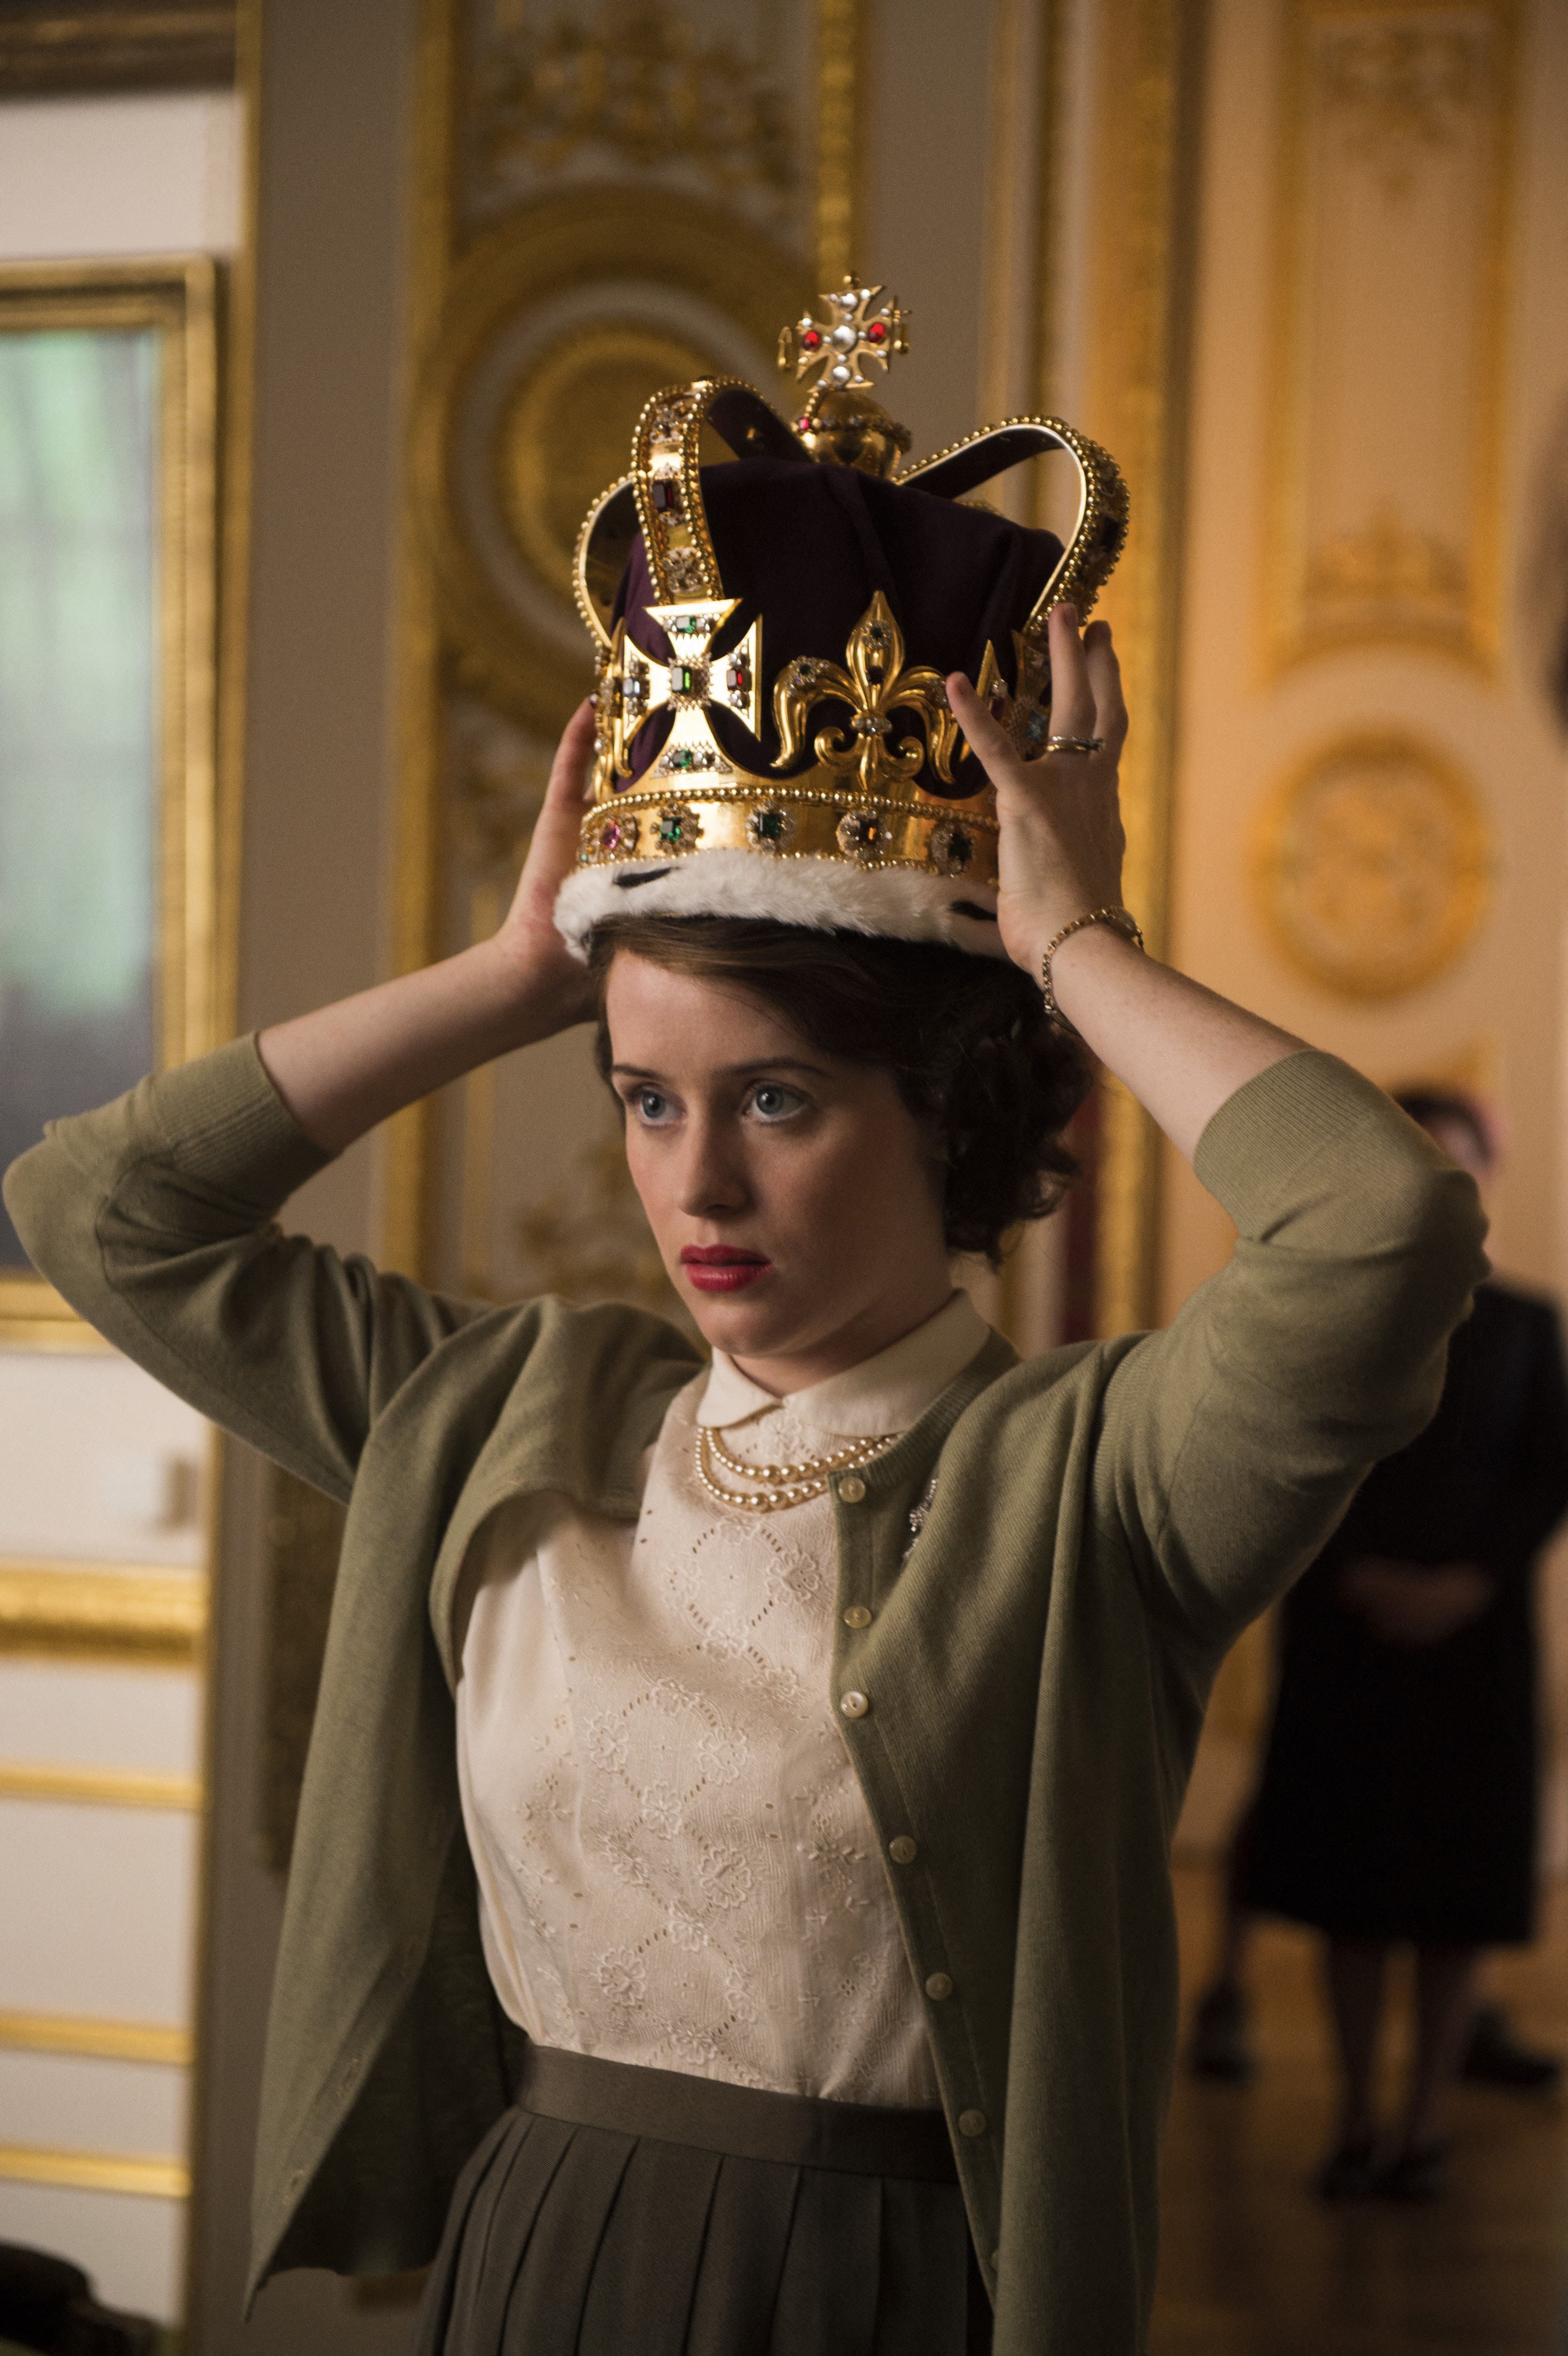 Foy places a gold crown on her head.